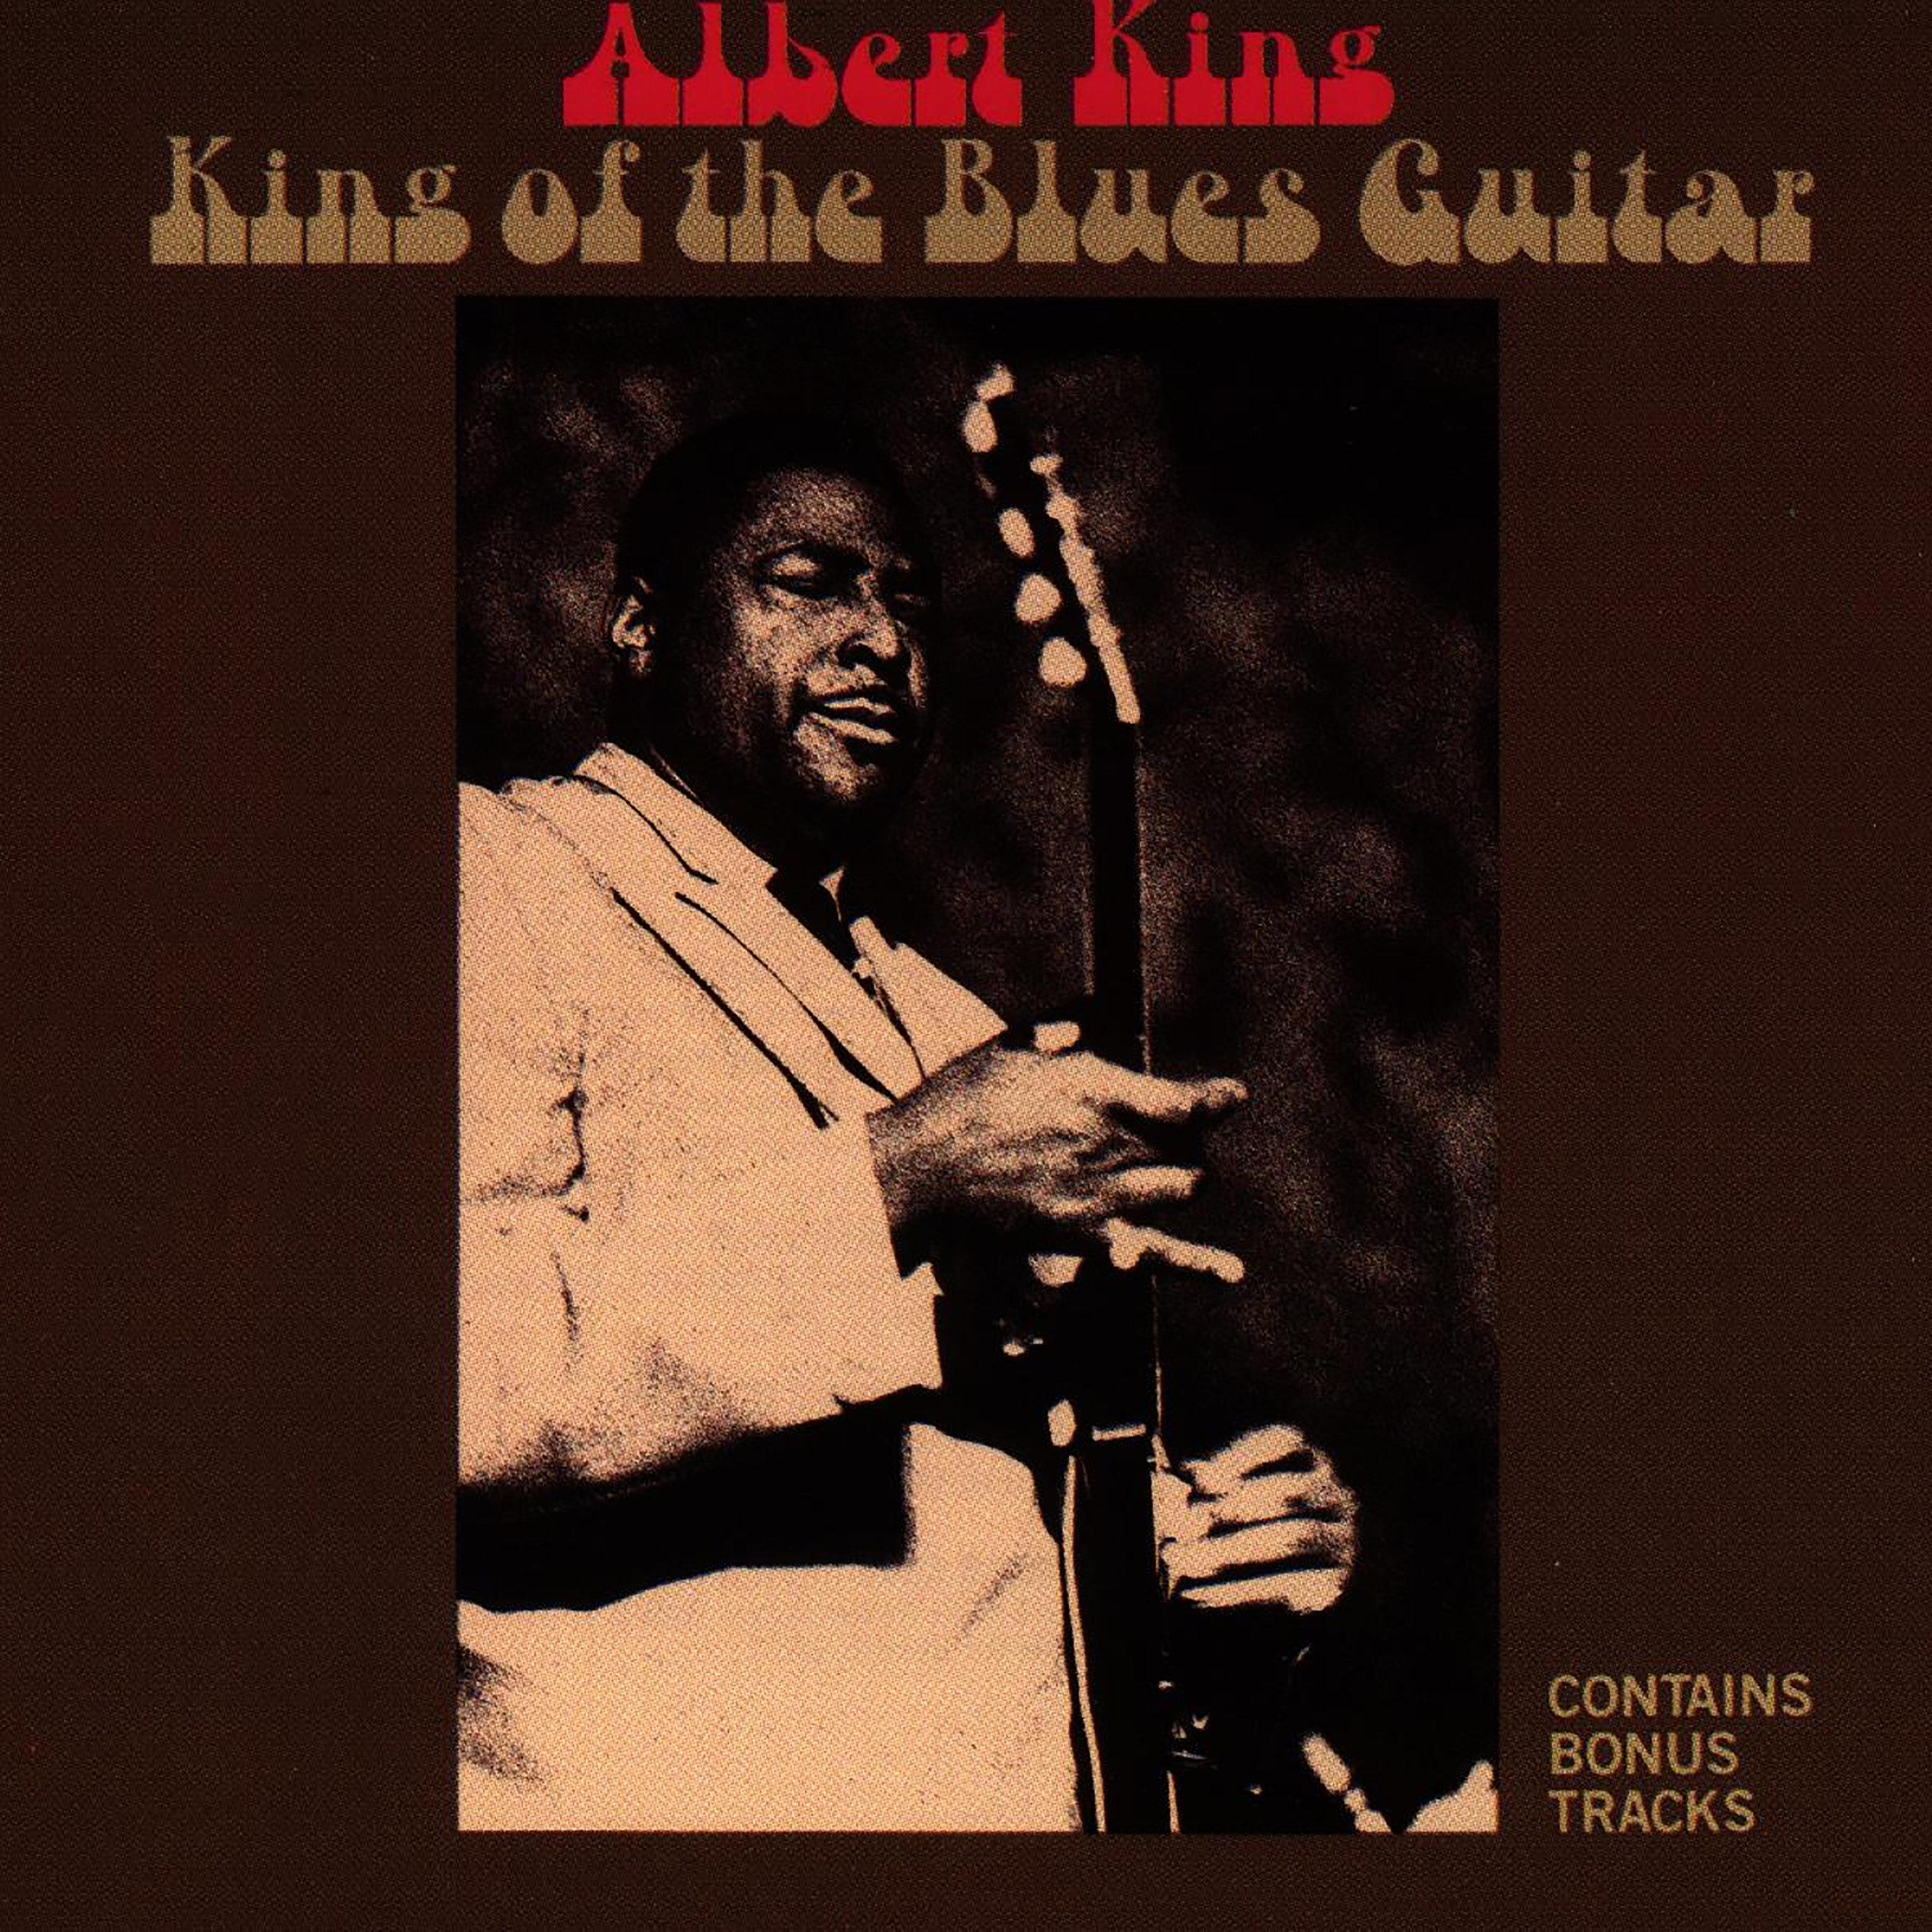 King Of The Blues Guitar (Deluxe Version)